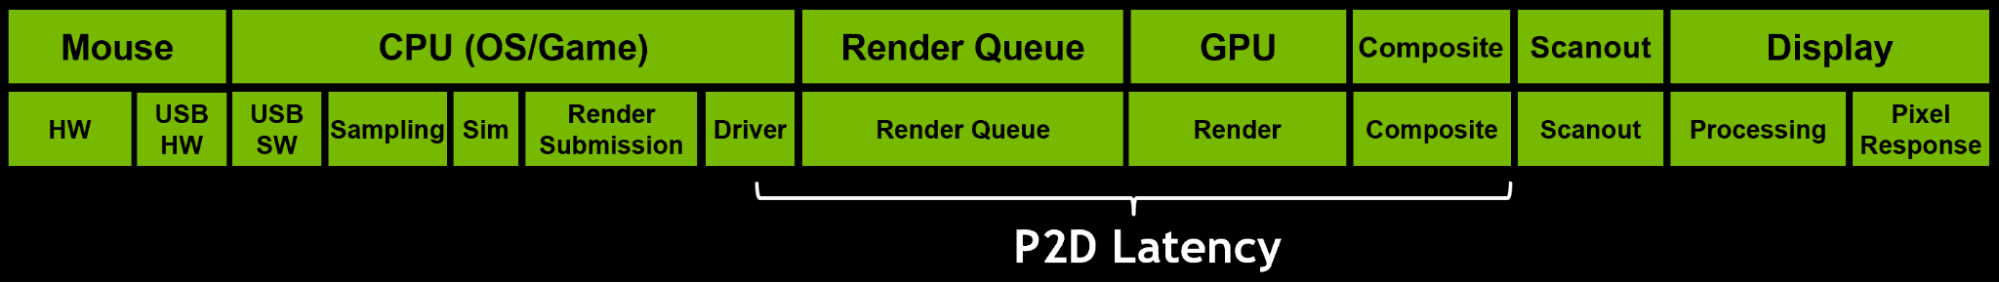 Diagram showing the render queue and GPU comprises P2D latency.